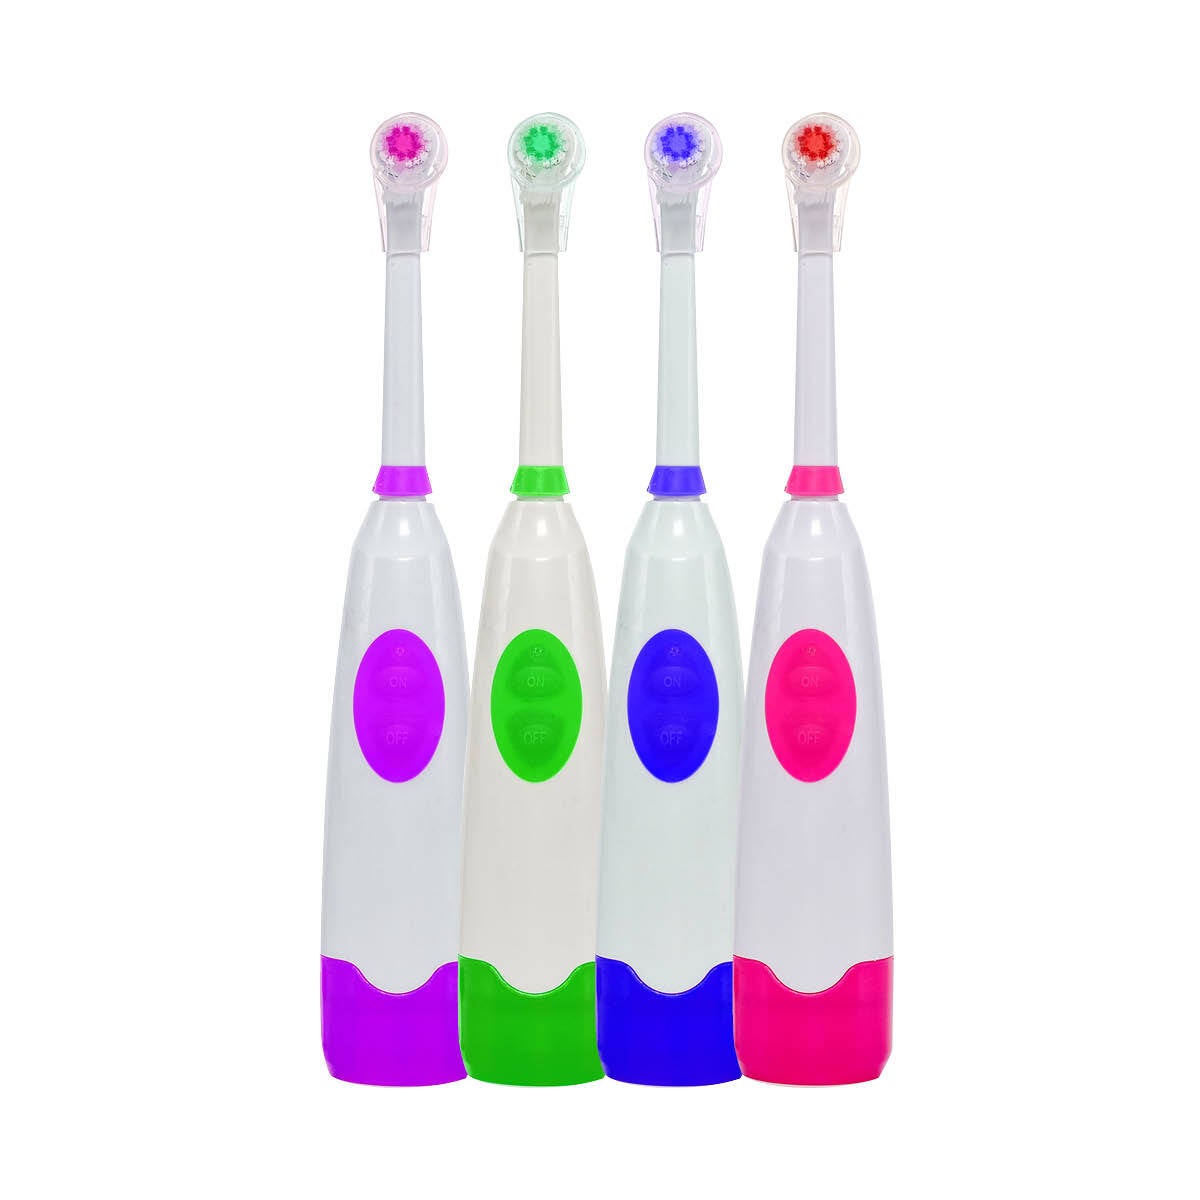 1st Care 4PK Electric Power Toothbrushes Medium Rotating Replaceable Heads